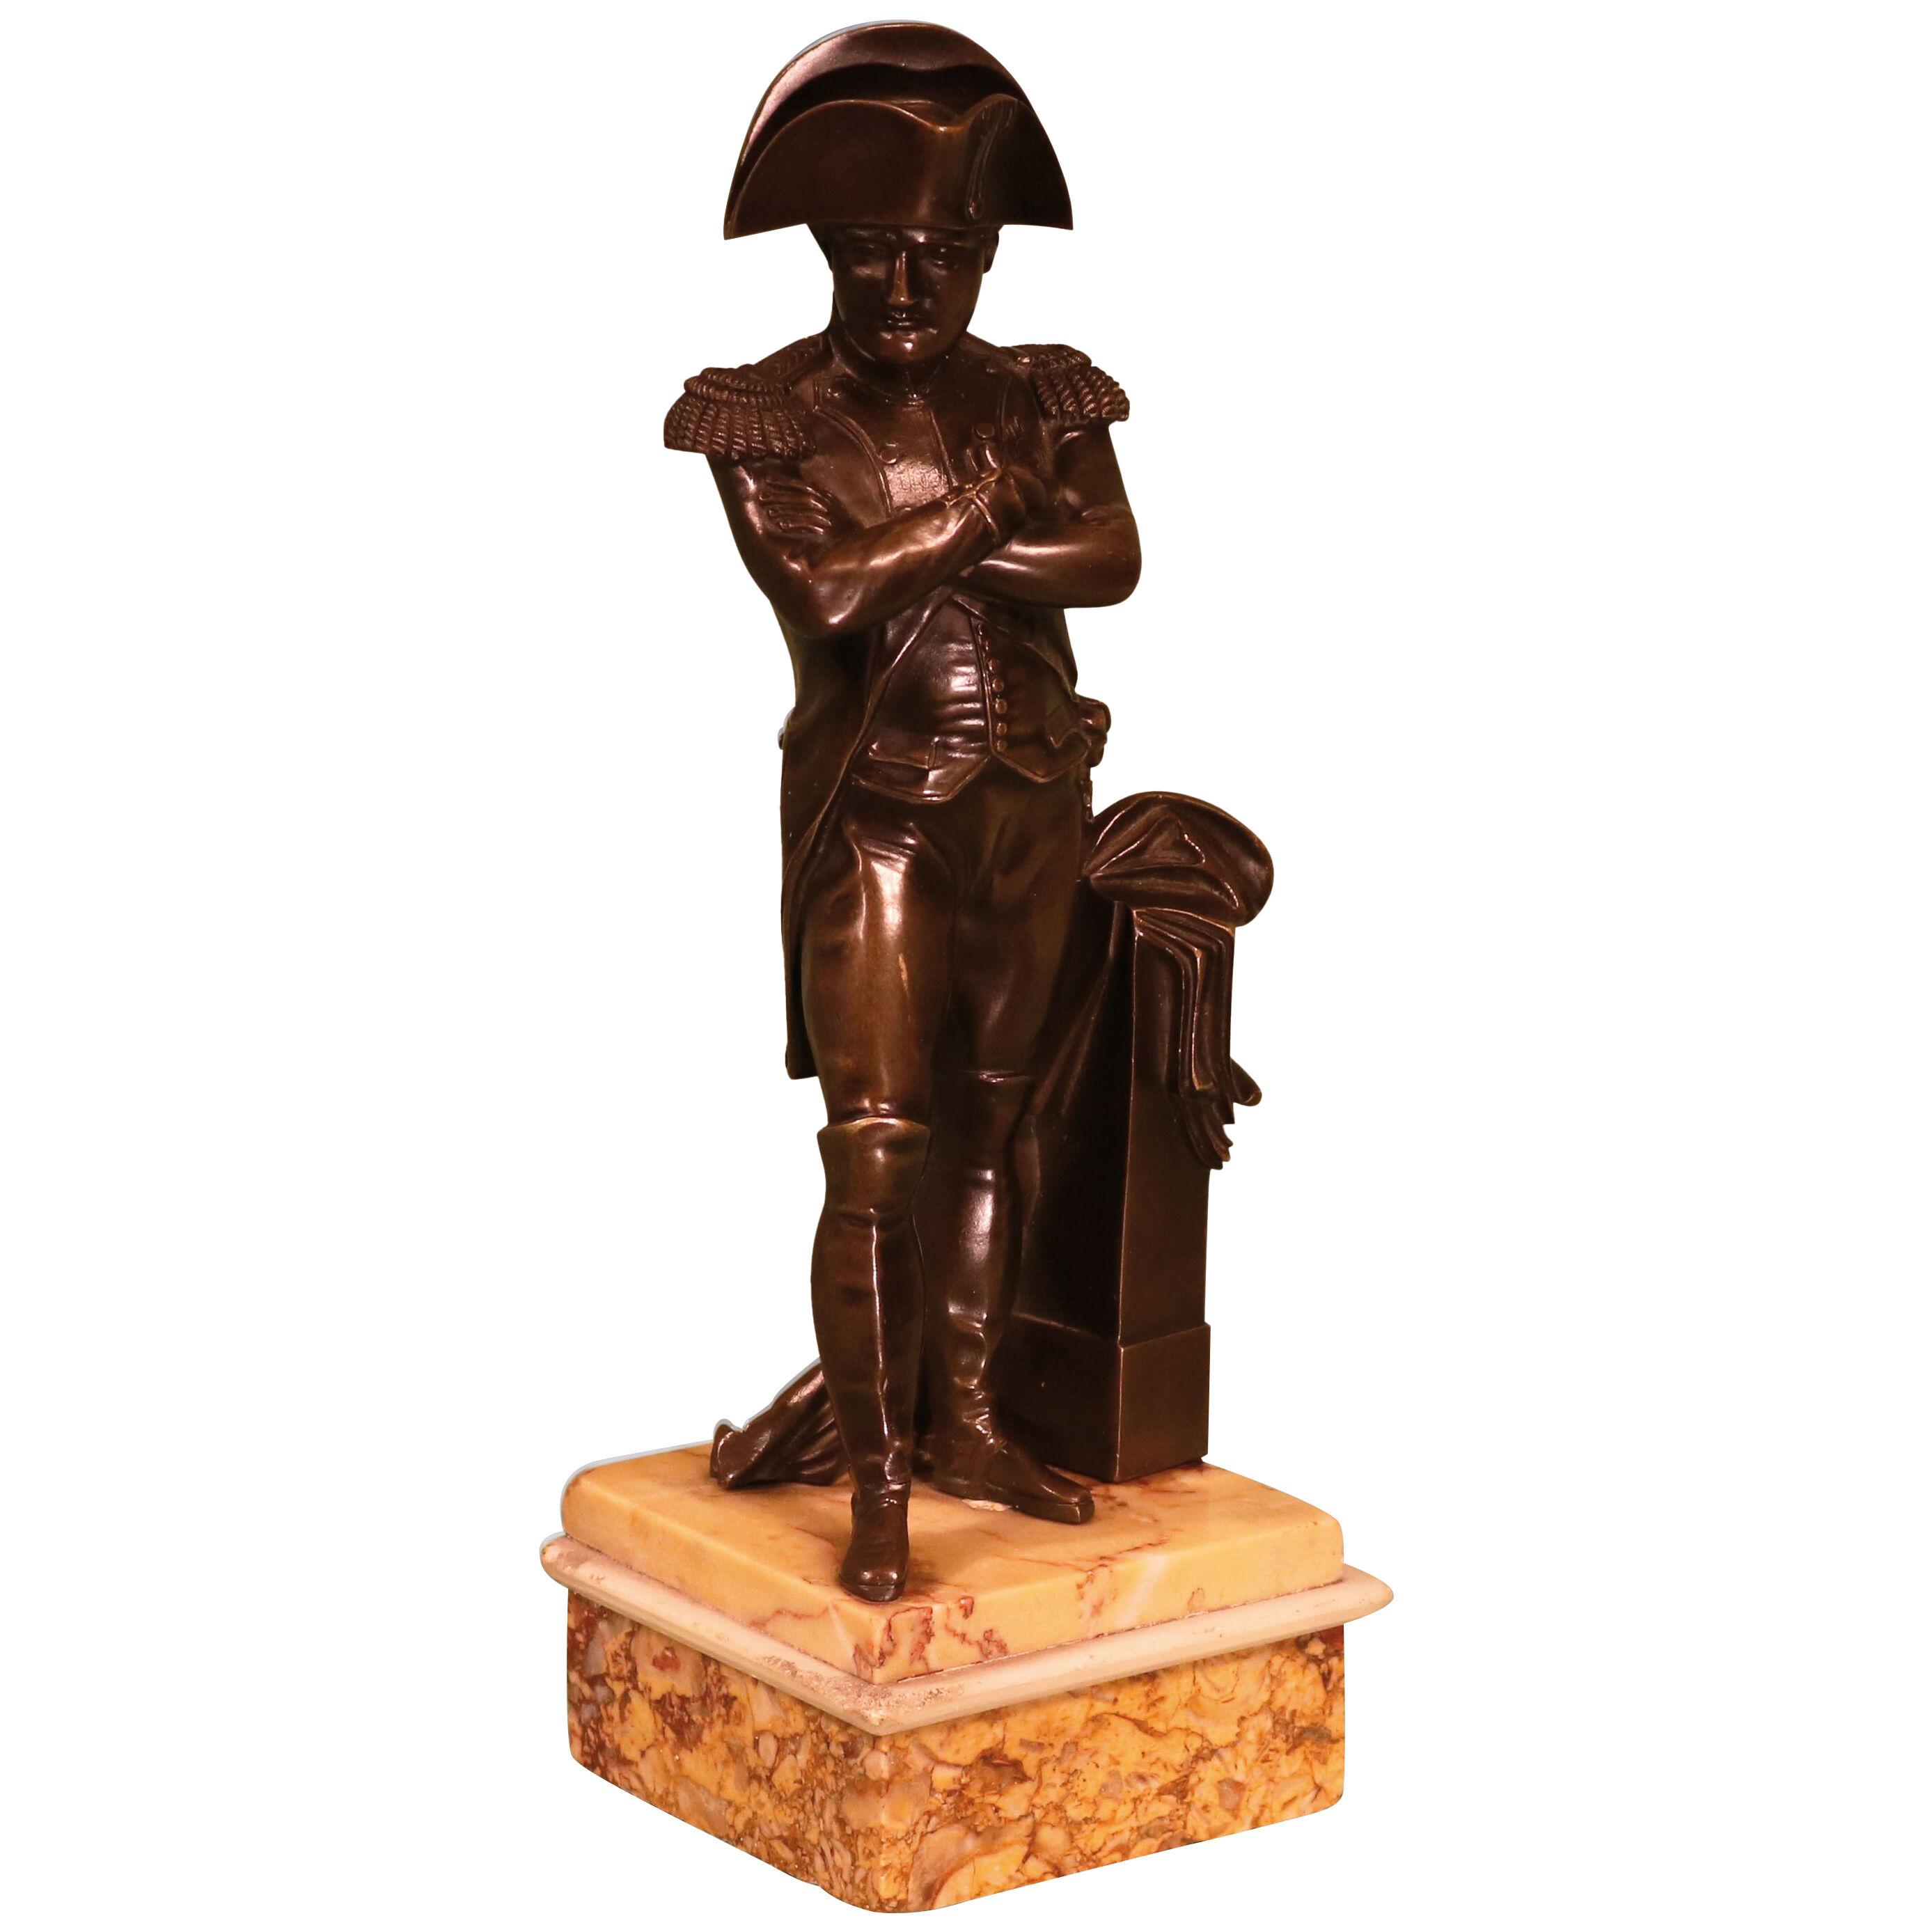 A 19th century French bronze of Napoleon on a Sienna marble base